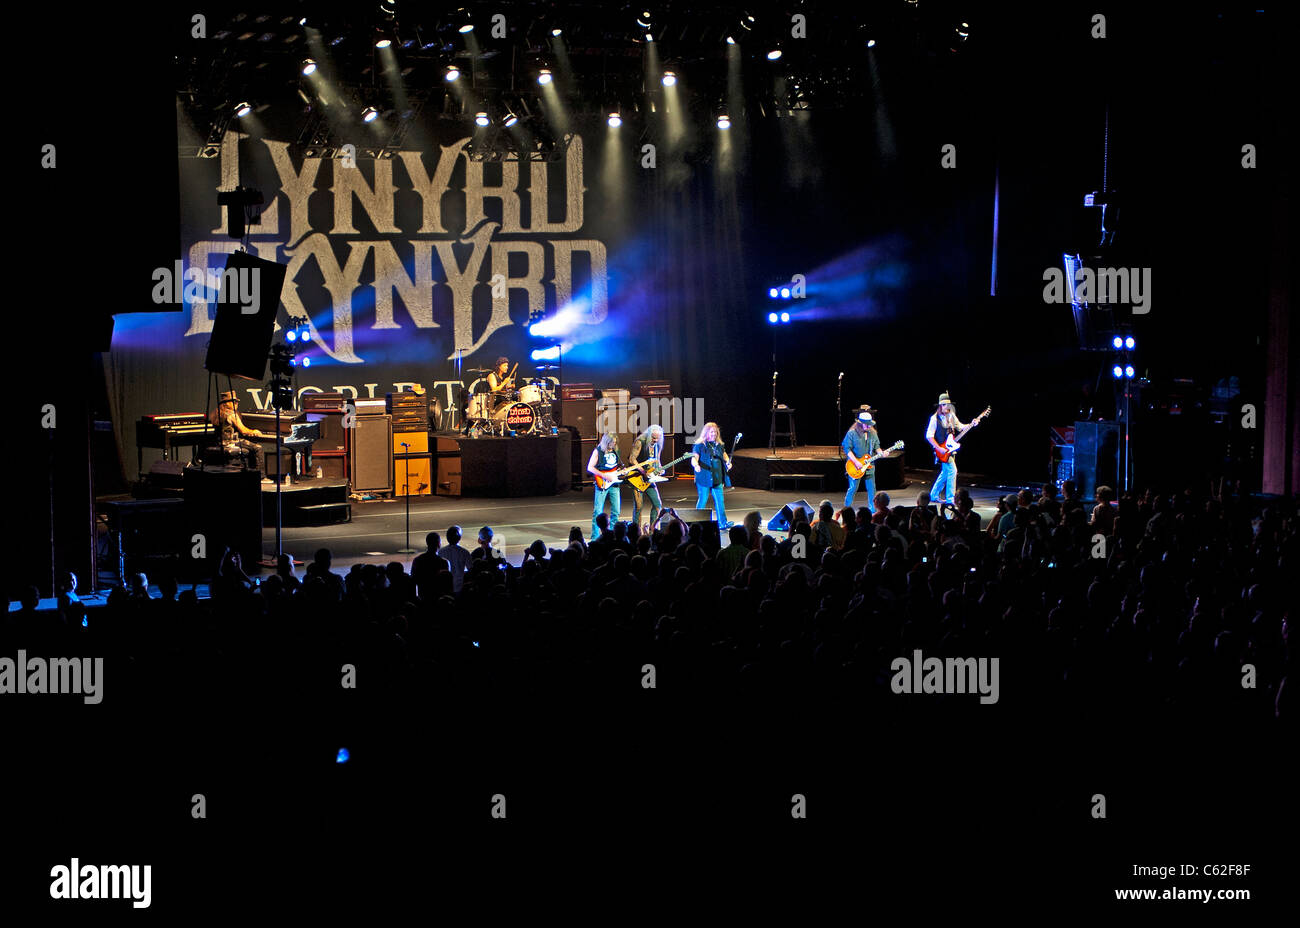 Lynyrd Synyrd in concert, a wide view of stage with logo and band members Stock Photo